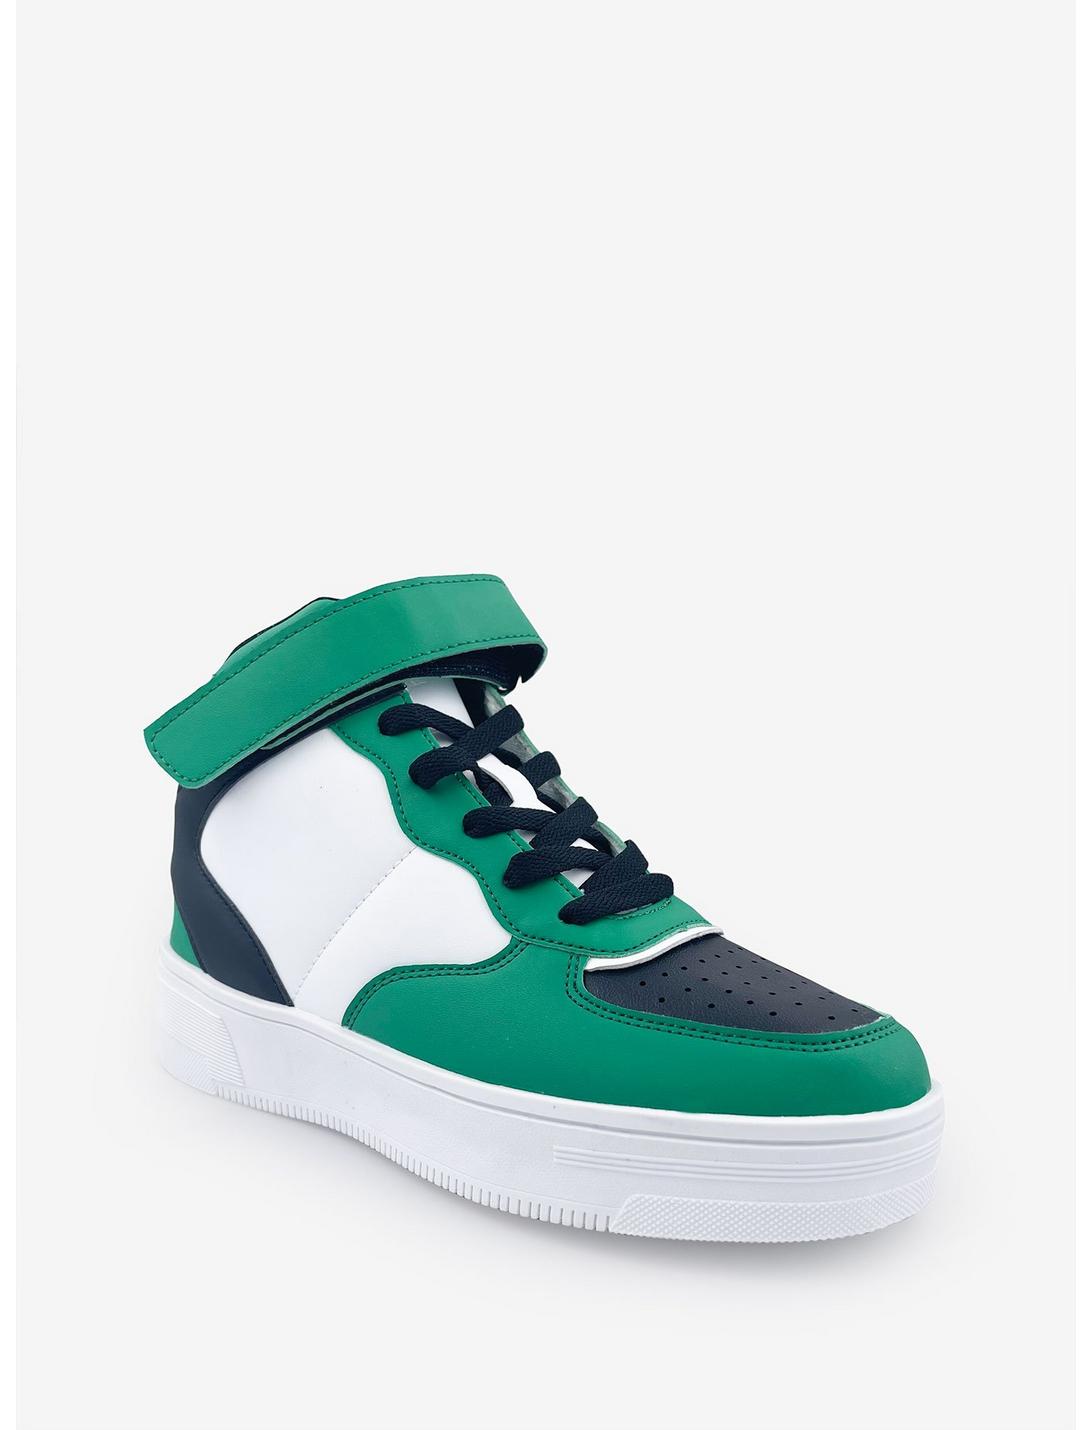 Rylee High Top Sneaker with Velcro Strap Green, GREEN, hi-res